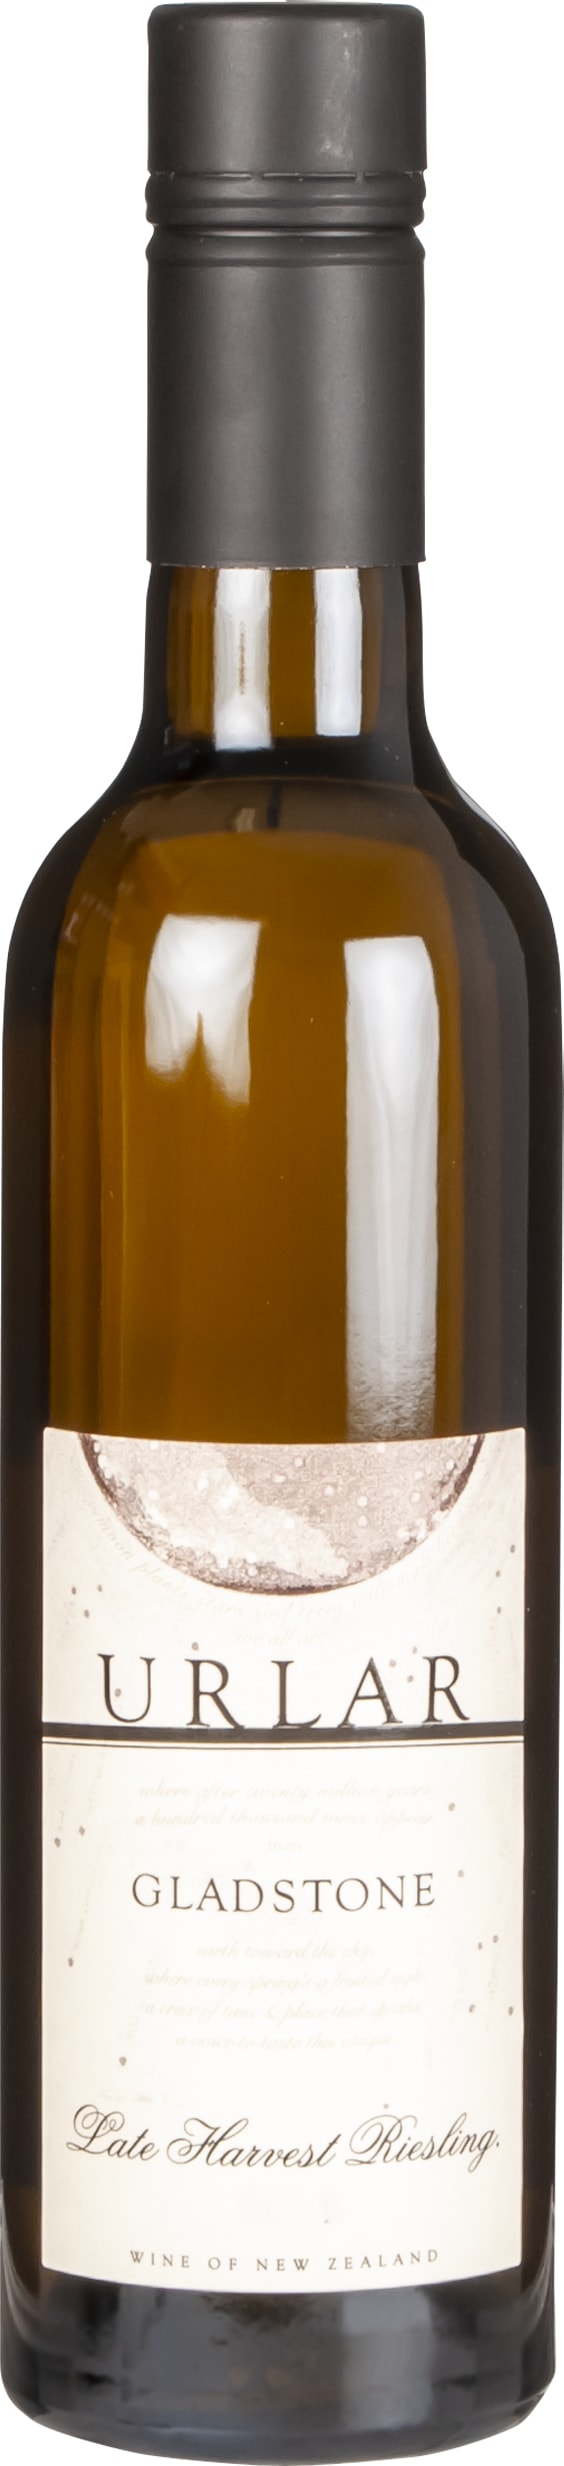 Late Harvest Riesling 21 Urlar 12/375 37.5cl - Buy Urlar Wines from GREAT WINES DIRECT wine shop